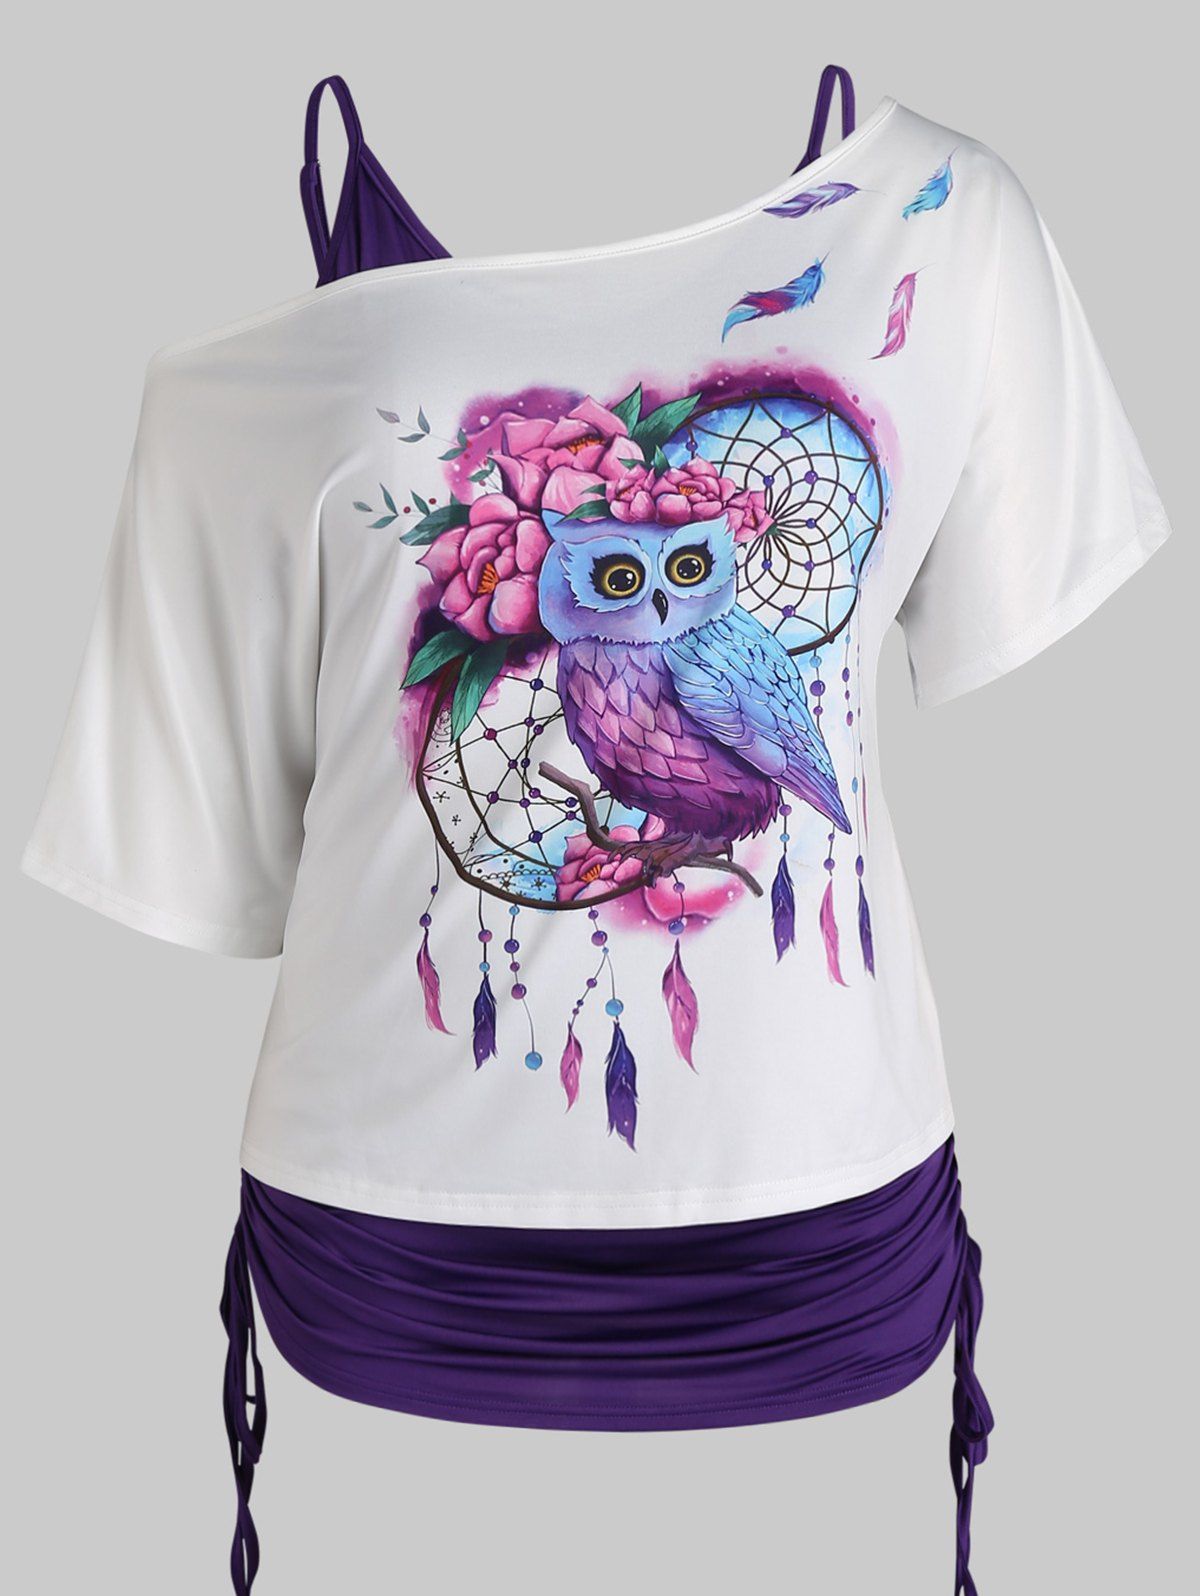 Plus Size Solid Color Cinched Tank Top and Dreamcatcher Floral Owl Print Skew Neck Ruched T Shirt Summer Casual Set - PURPLE 4X